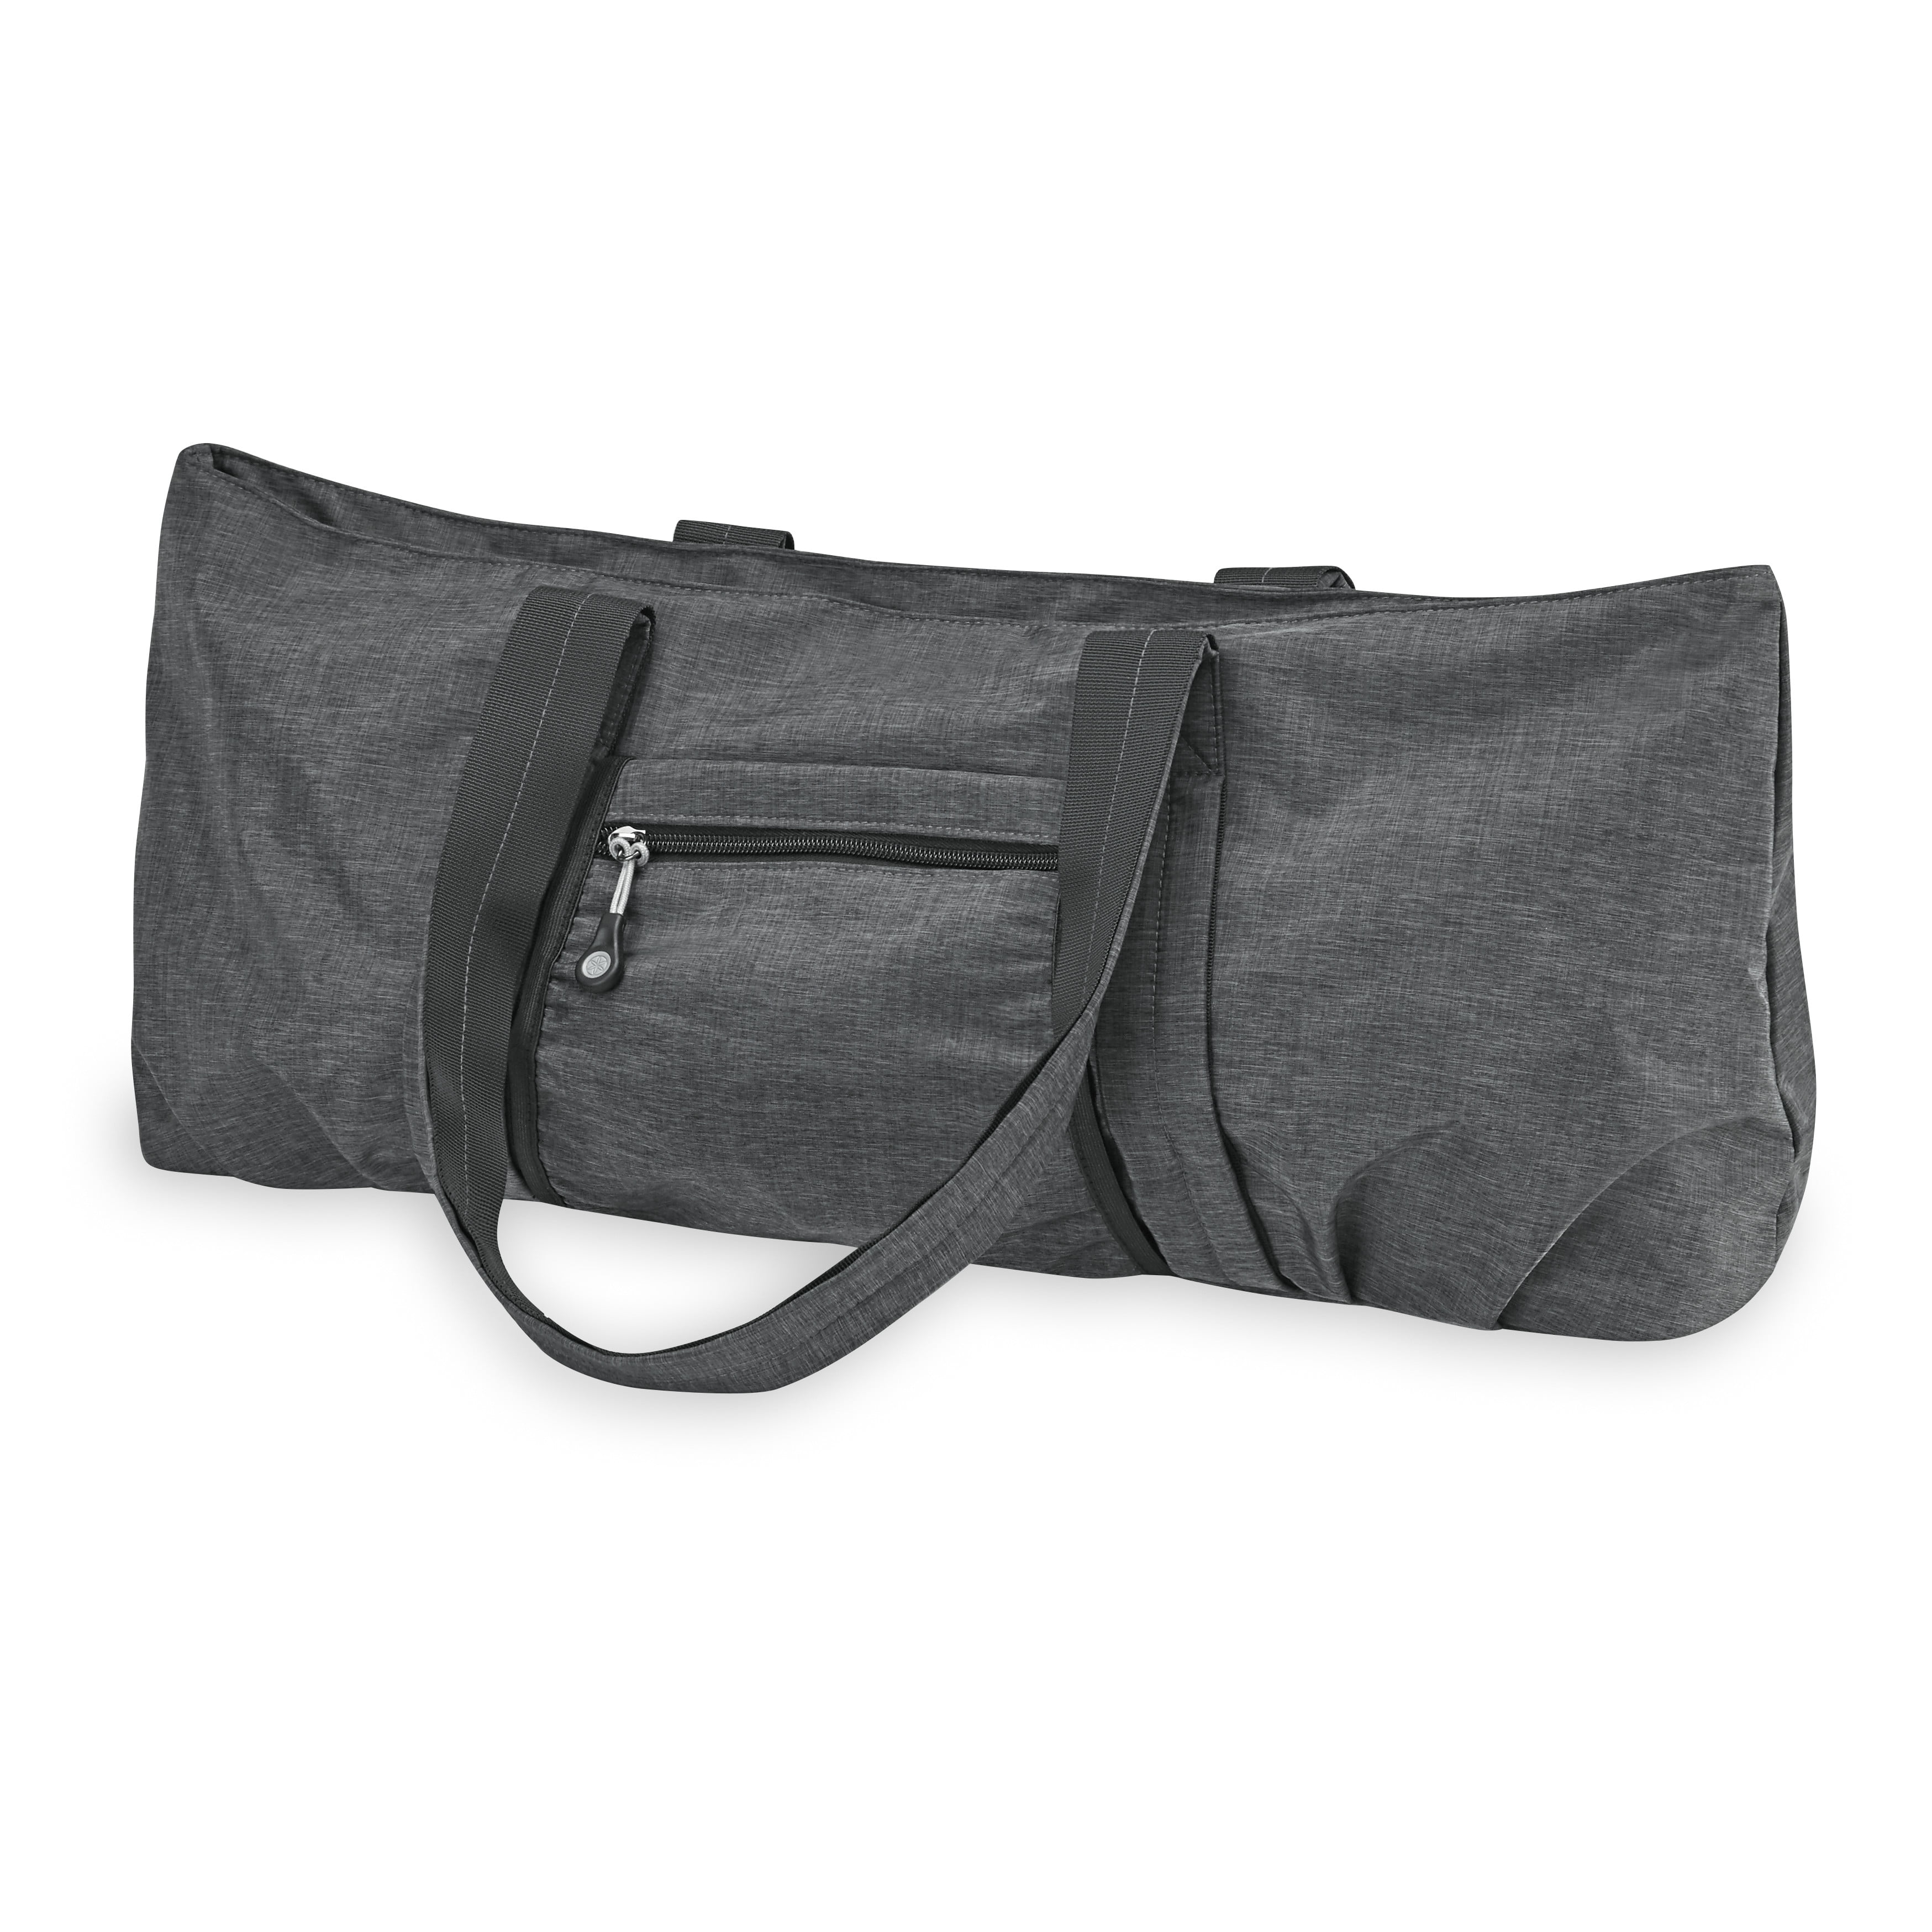 Gaiam Breakaway Yoga Tote Bag - Gym and Travel Essentials Bag with Multiple  Zippered Pockets, Padded Laptop Compartment, Yoga Mat Straps, and  Adjustable Shoulder Strap - Black, 15x13x3.5 : : Sports, Fitness